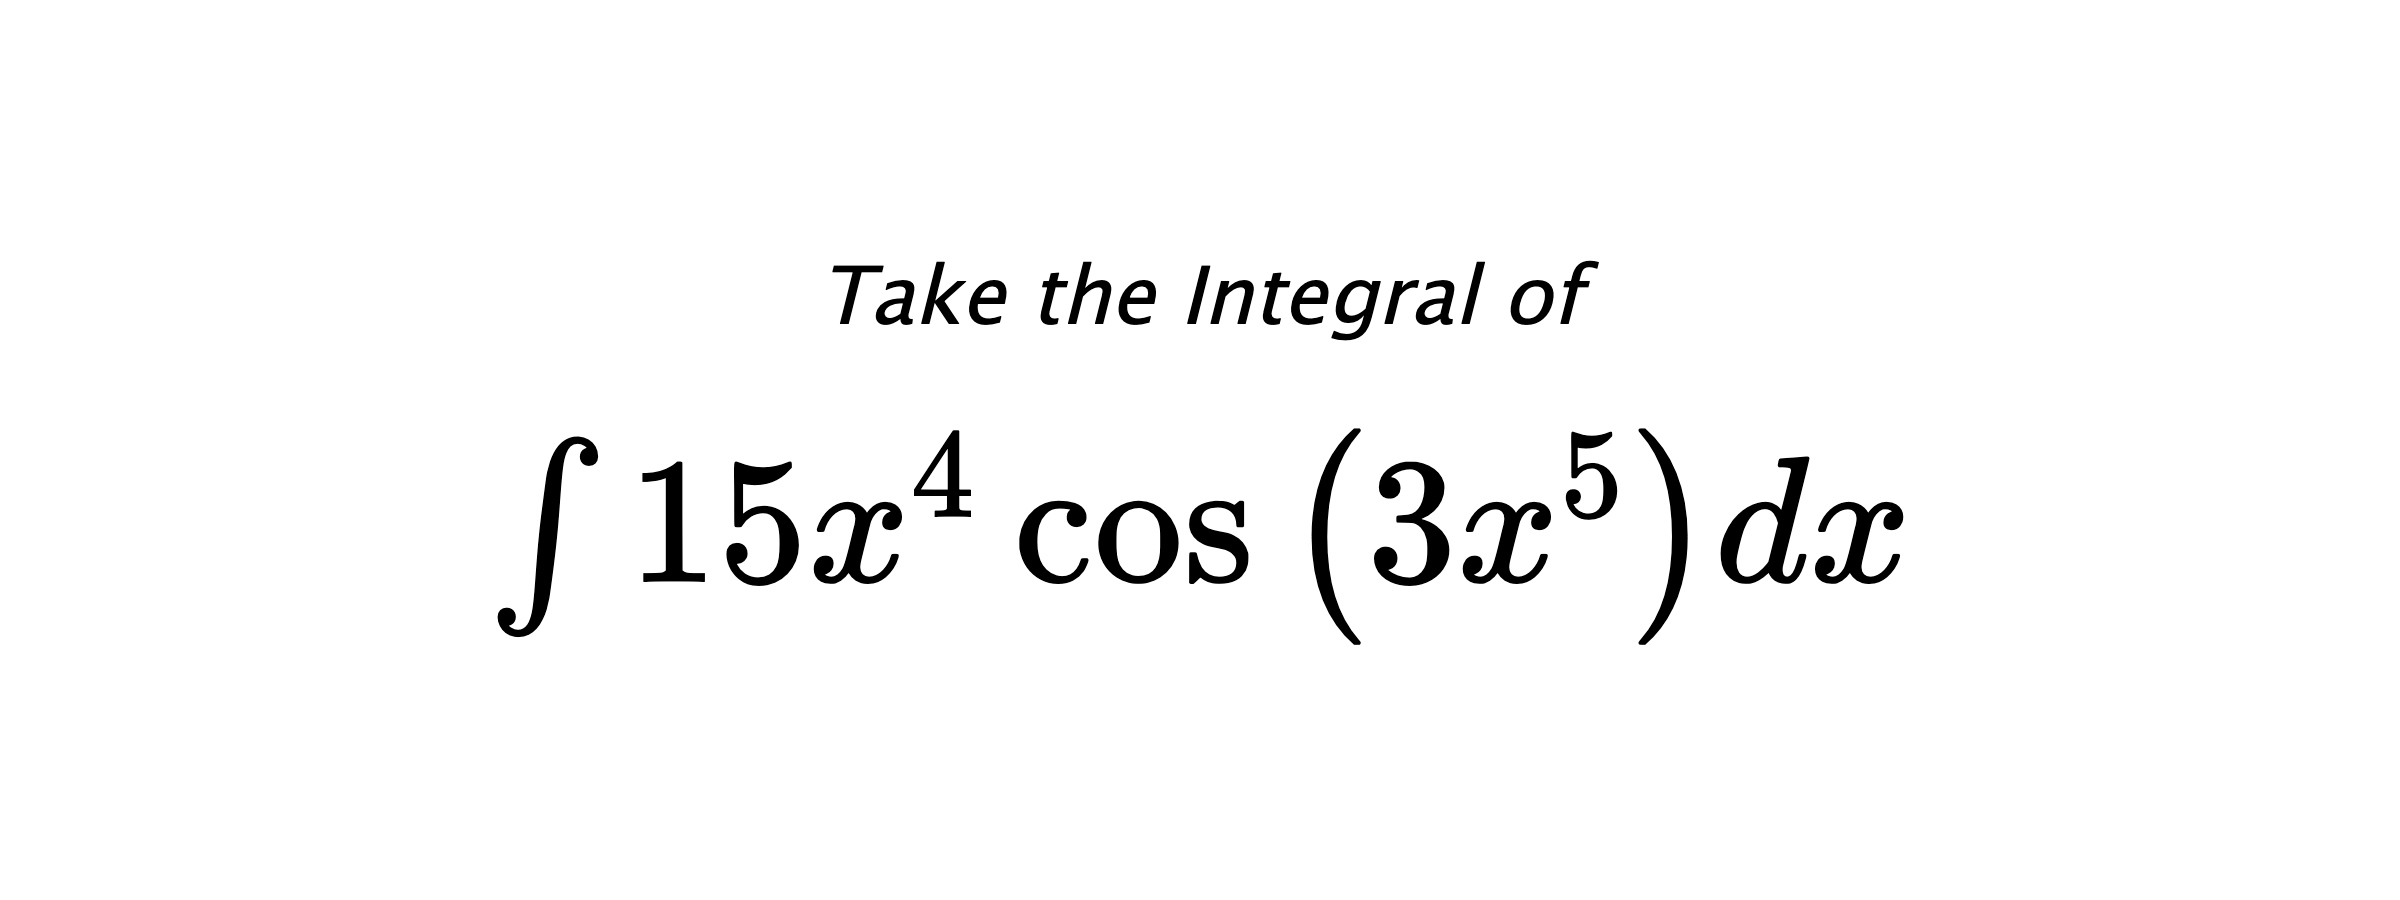 Take the Integral of $ \int 15 x^{4} \cos{\left(3 x^{5} \right)} dx $